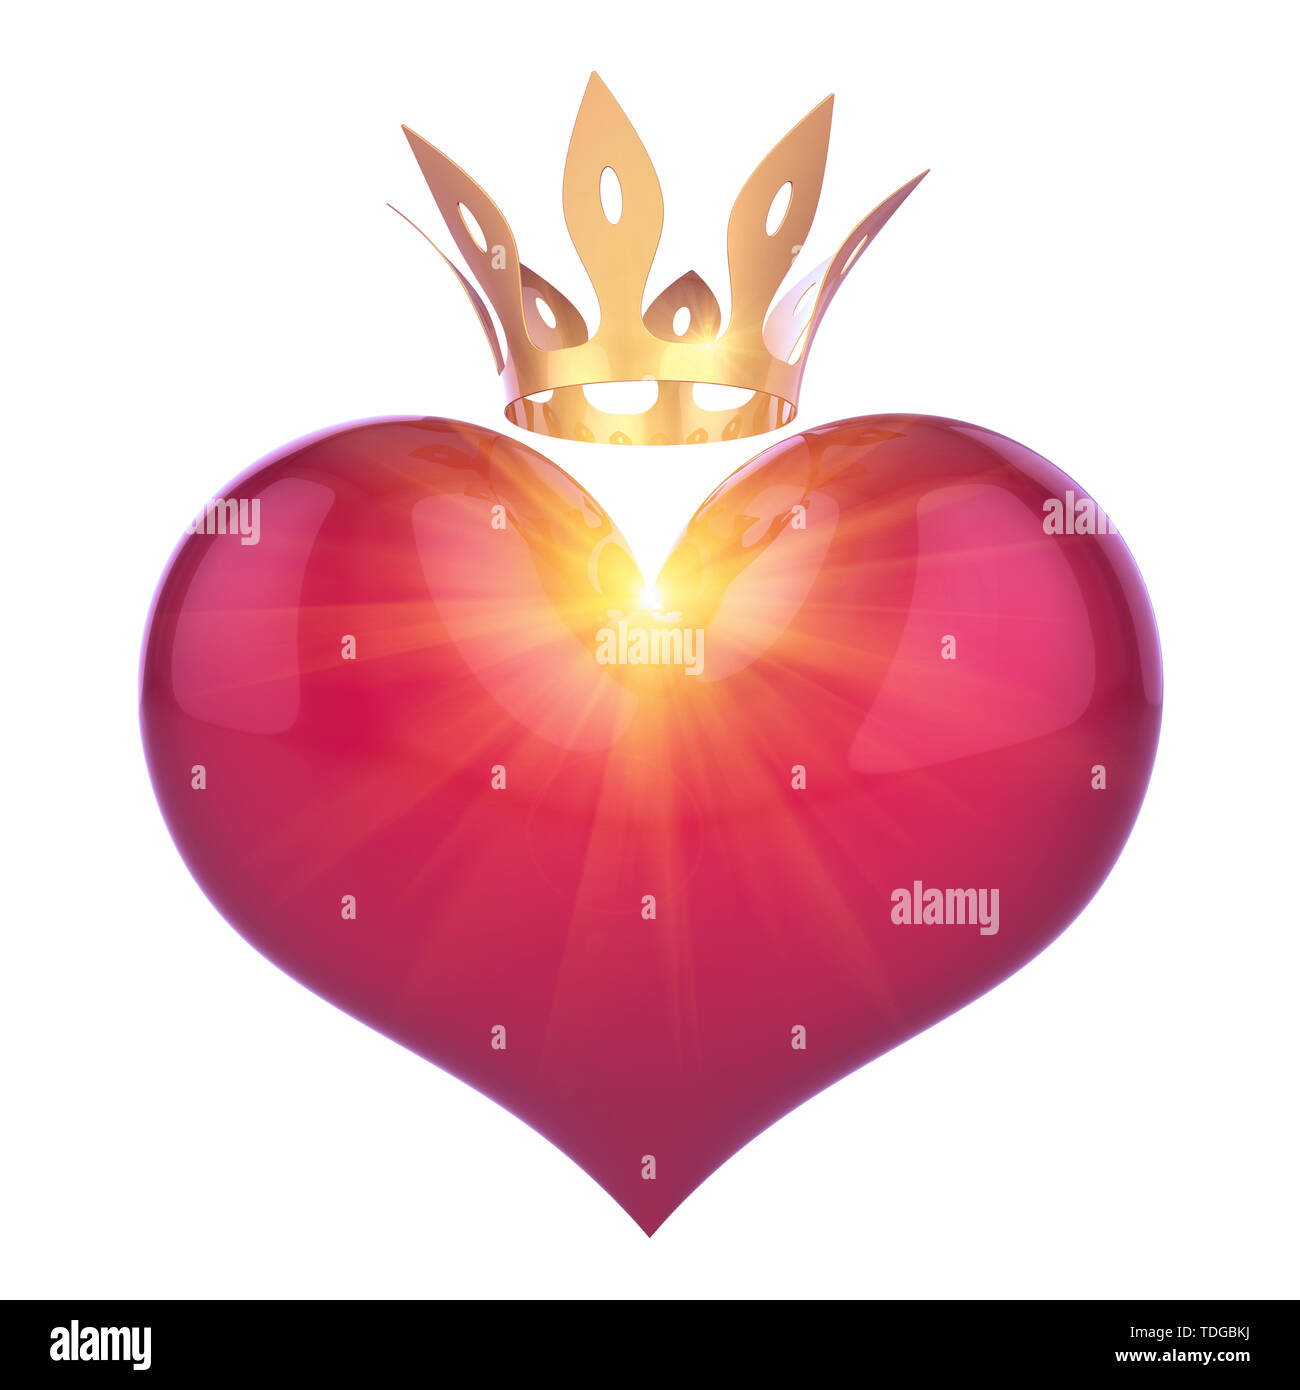 Heart shape king queen red with golden crown abstract. Royal lucky love concept. 3d illustration isolated on white background Stock Photo